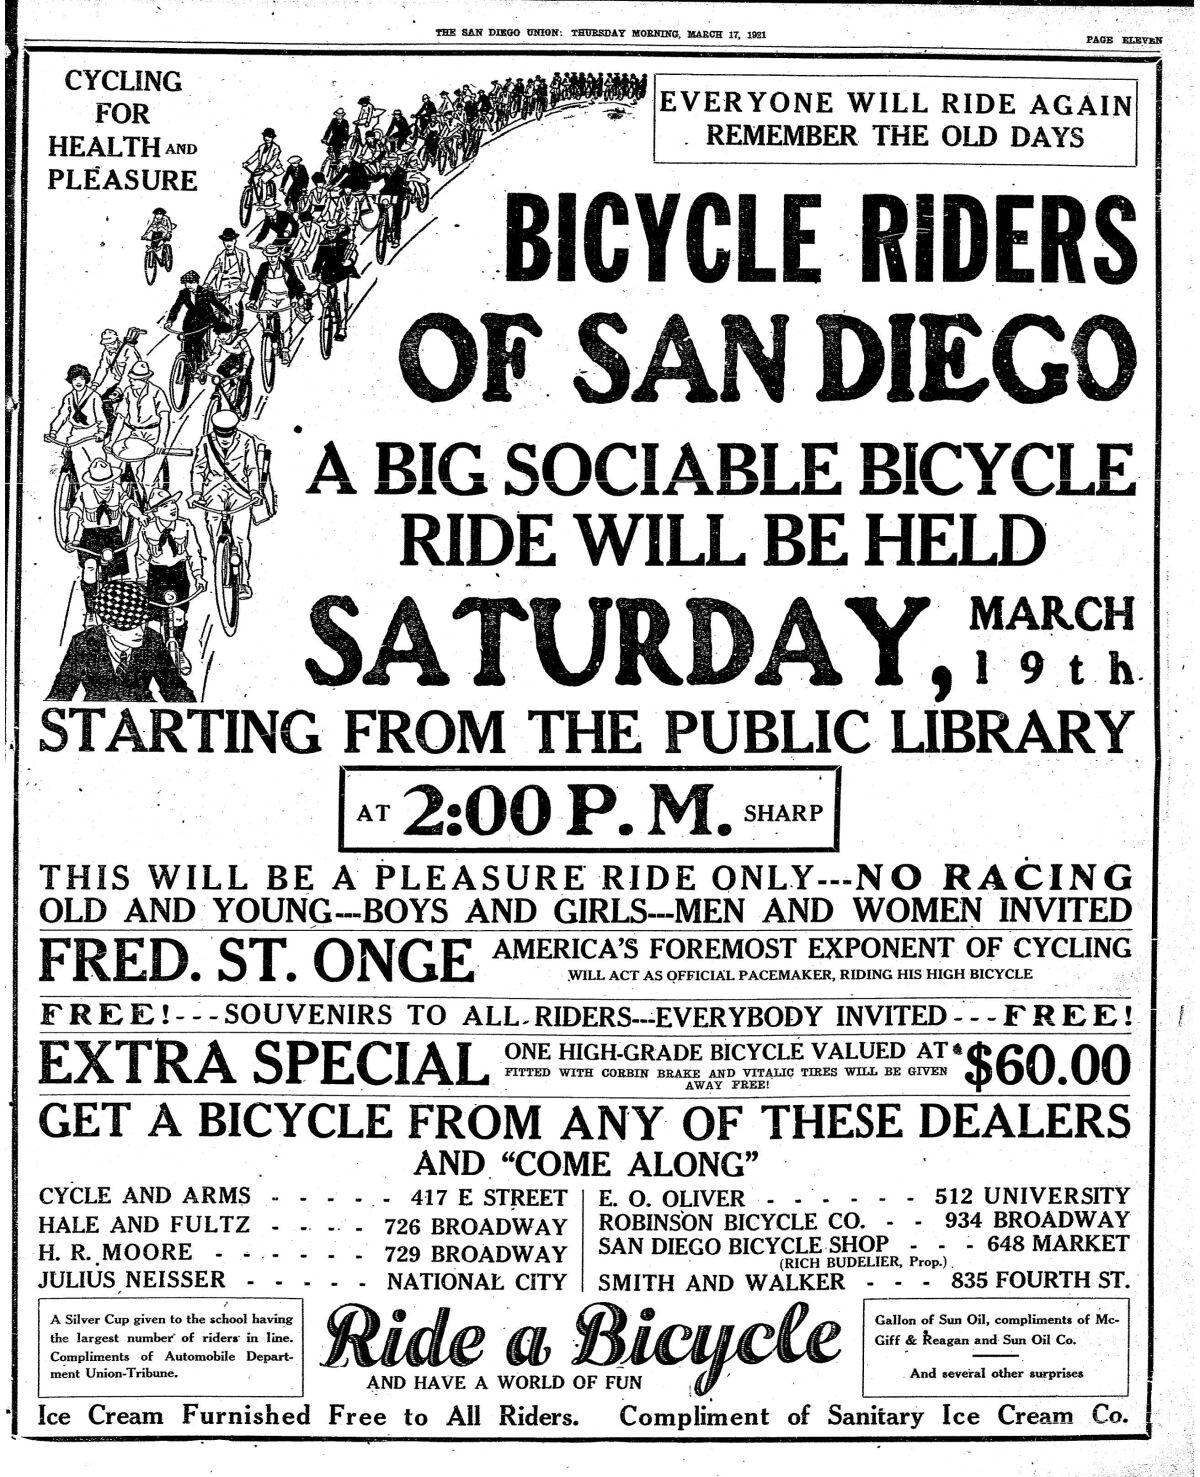 A full-page bicycle advertisement from The San Diego Union, March 17, 1921.